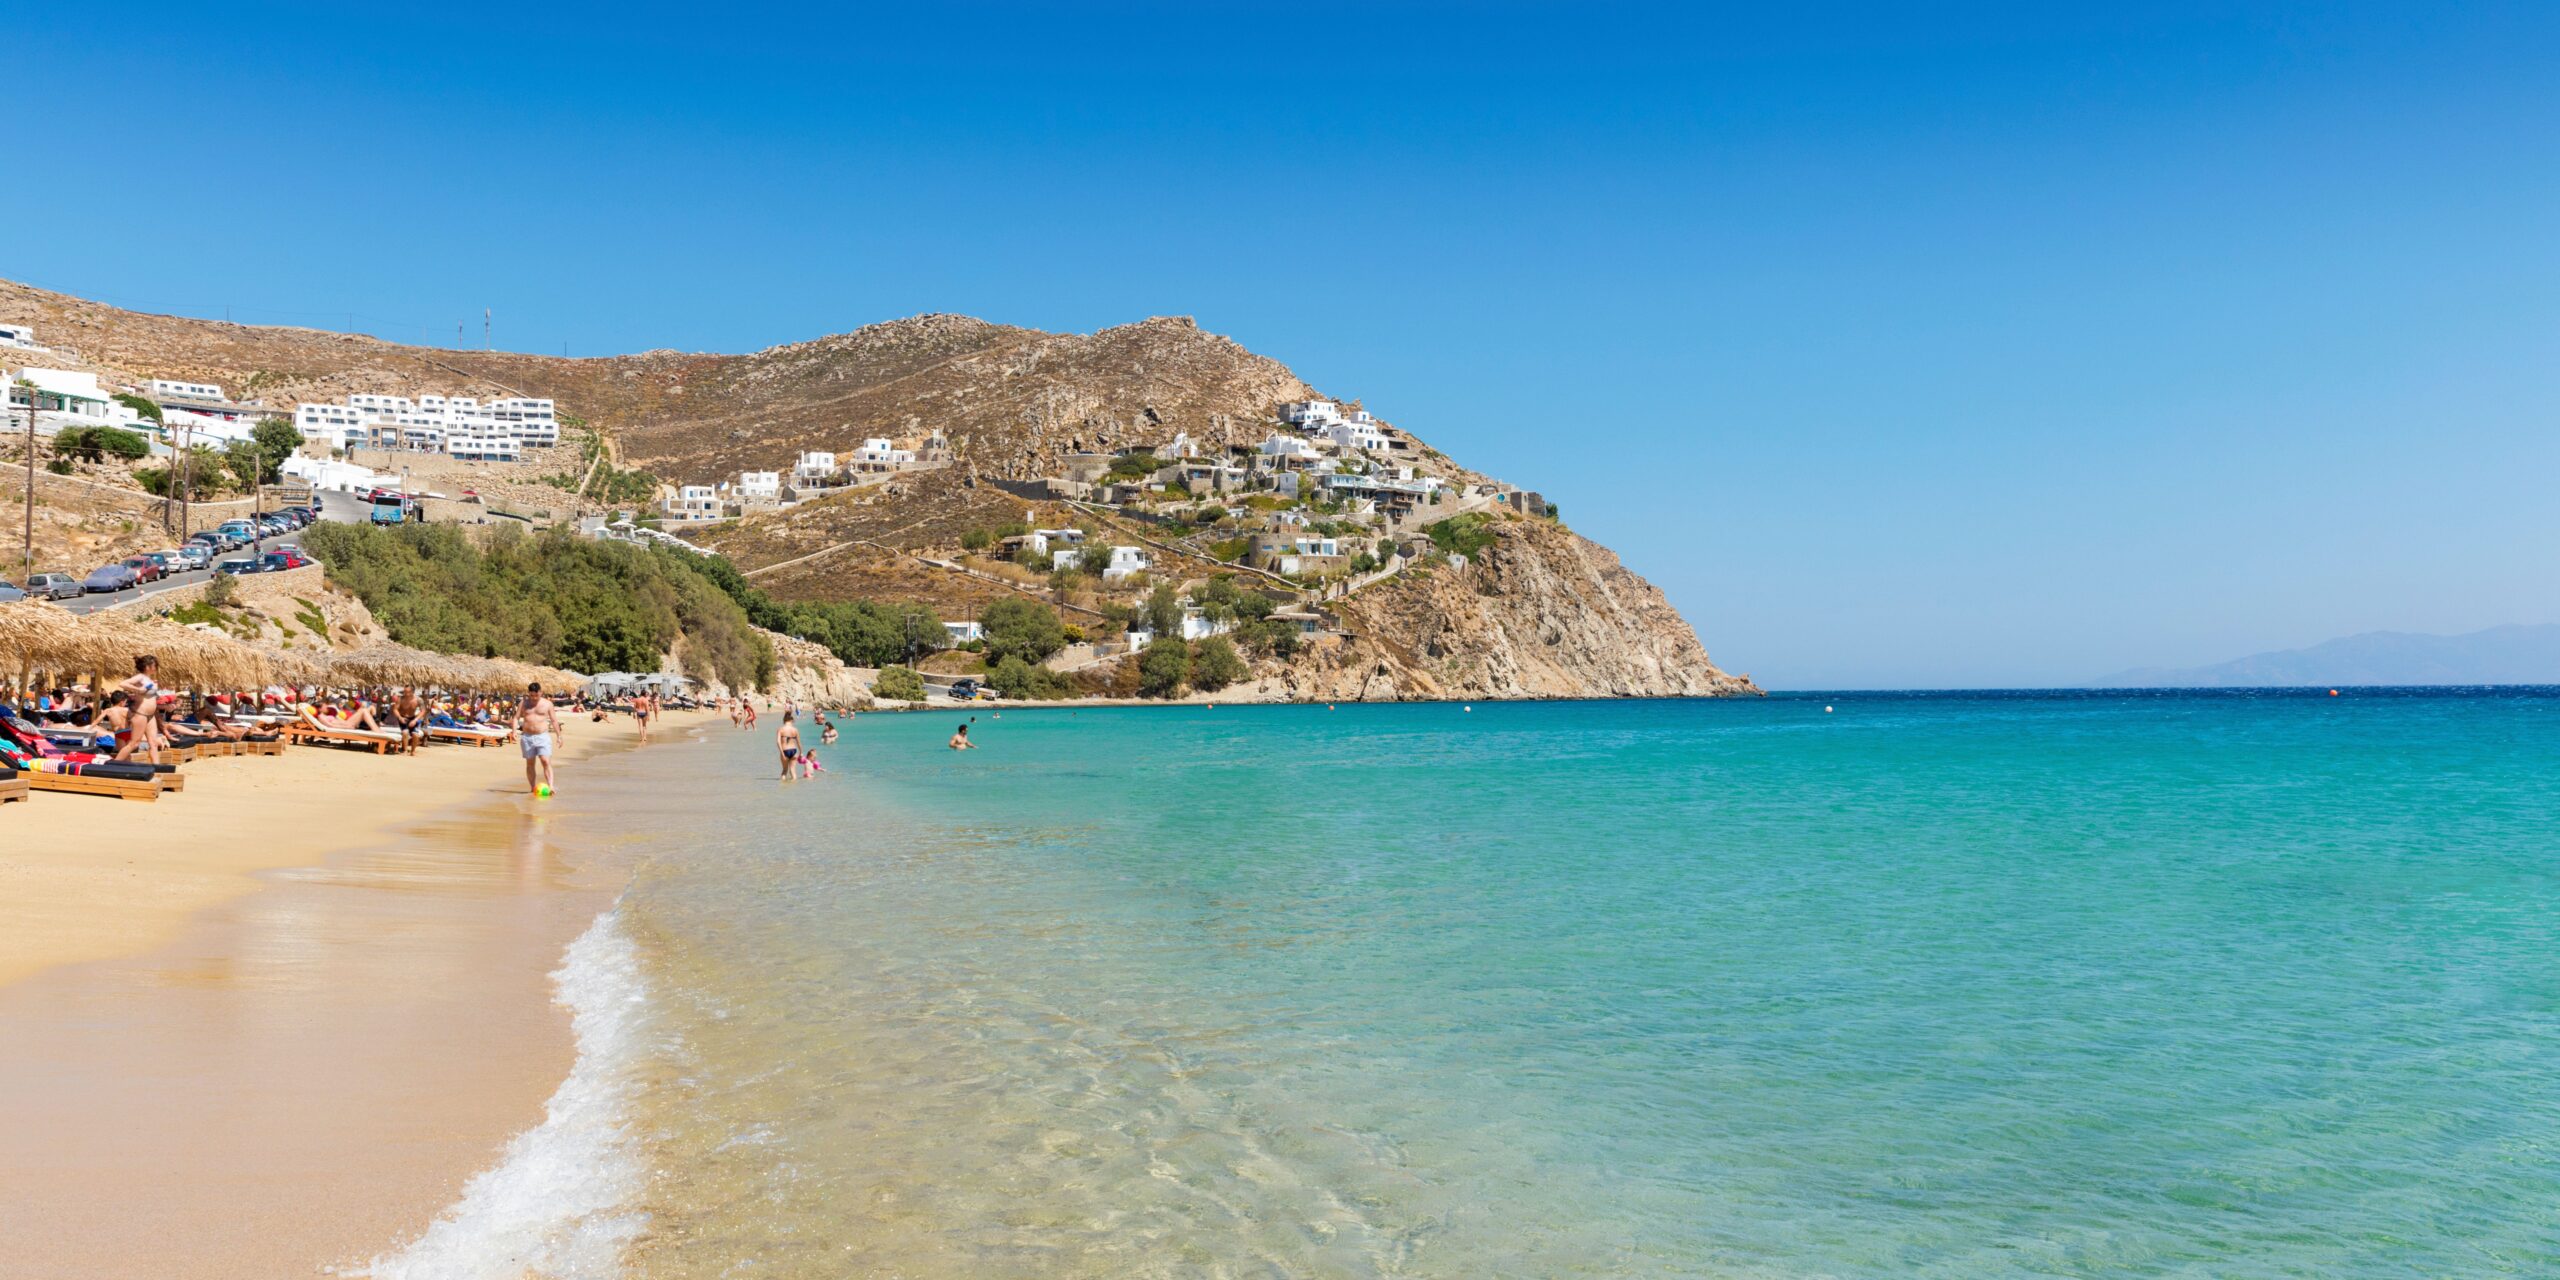 Holidaymakers bask in the sun and wade into the inviting waters of Elia Beach, framed by the scenic hills of Mykonos.